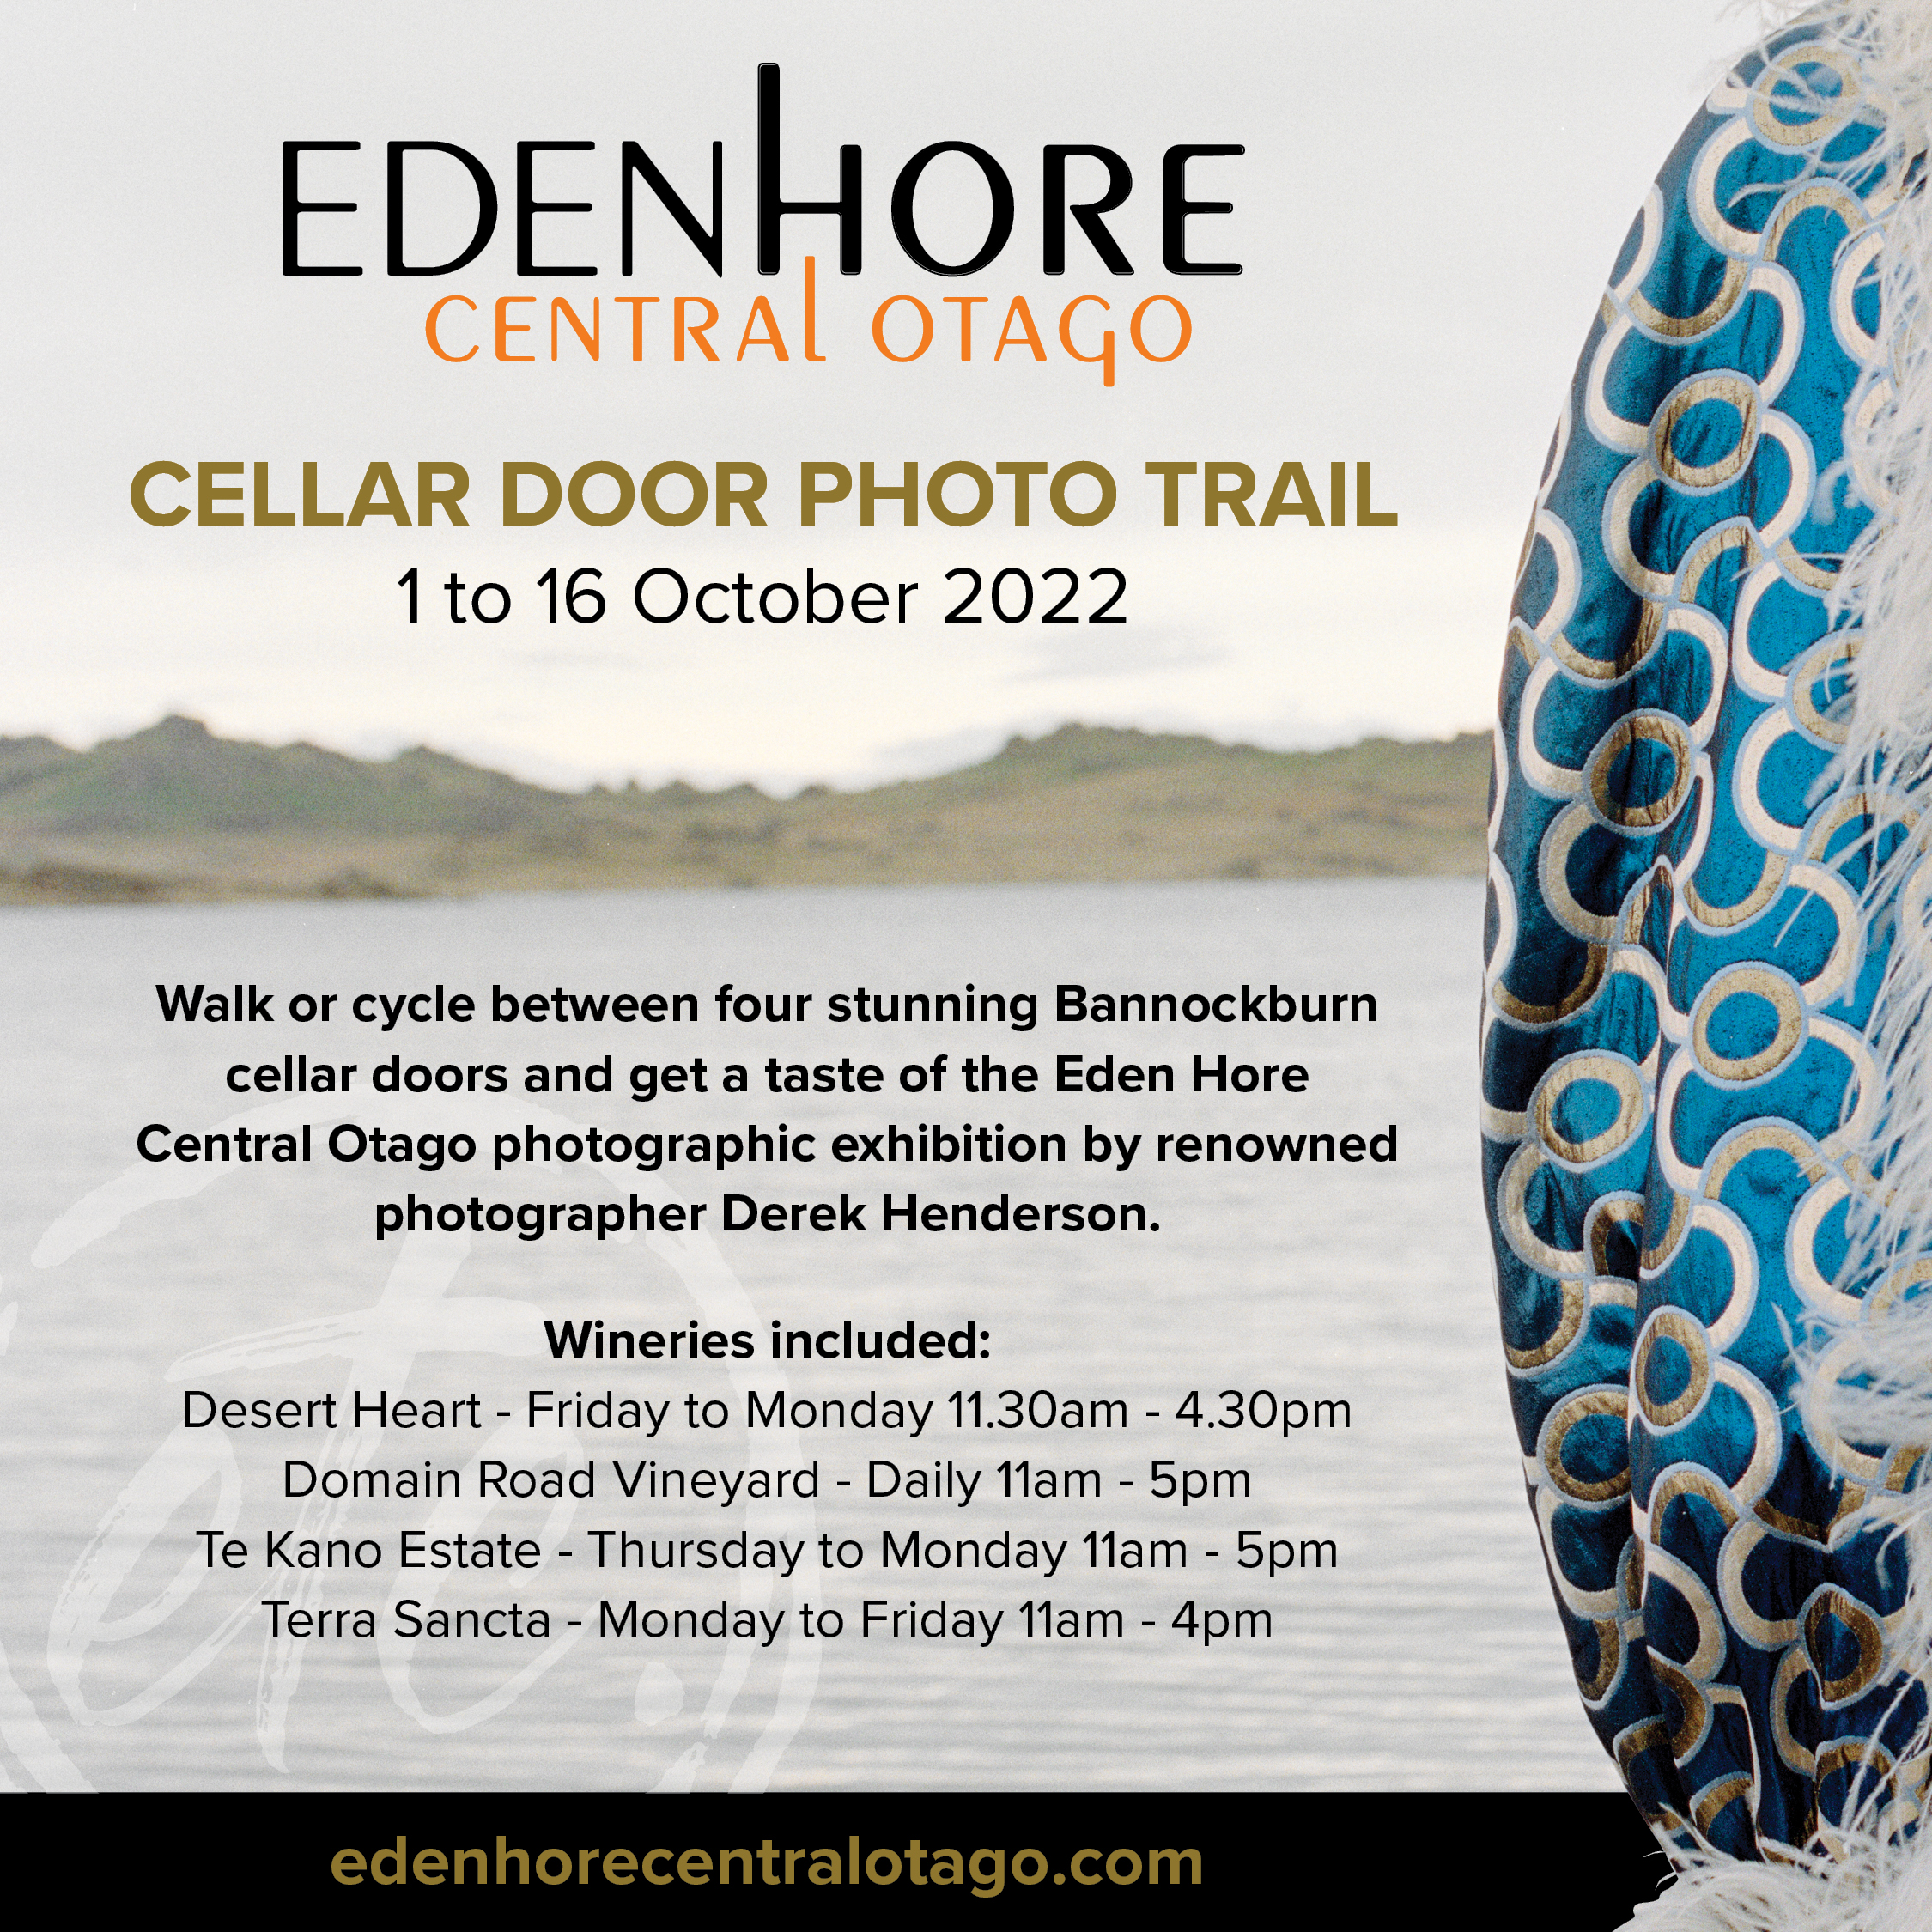 ​The Eden Hore Central Otago photographic exhibition promises to be a sensory delight for the Central Otago region again this season.